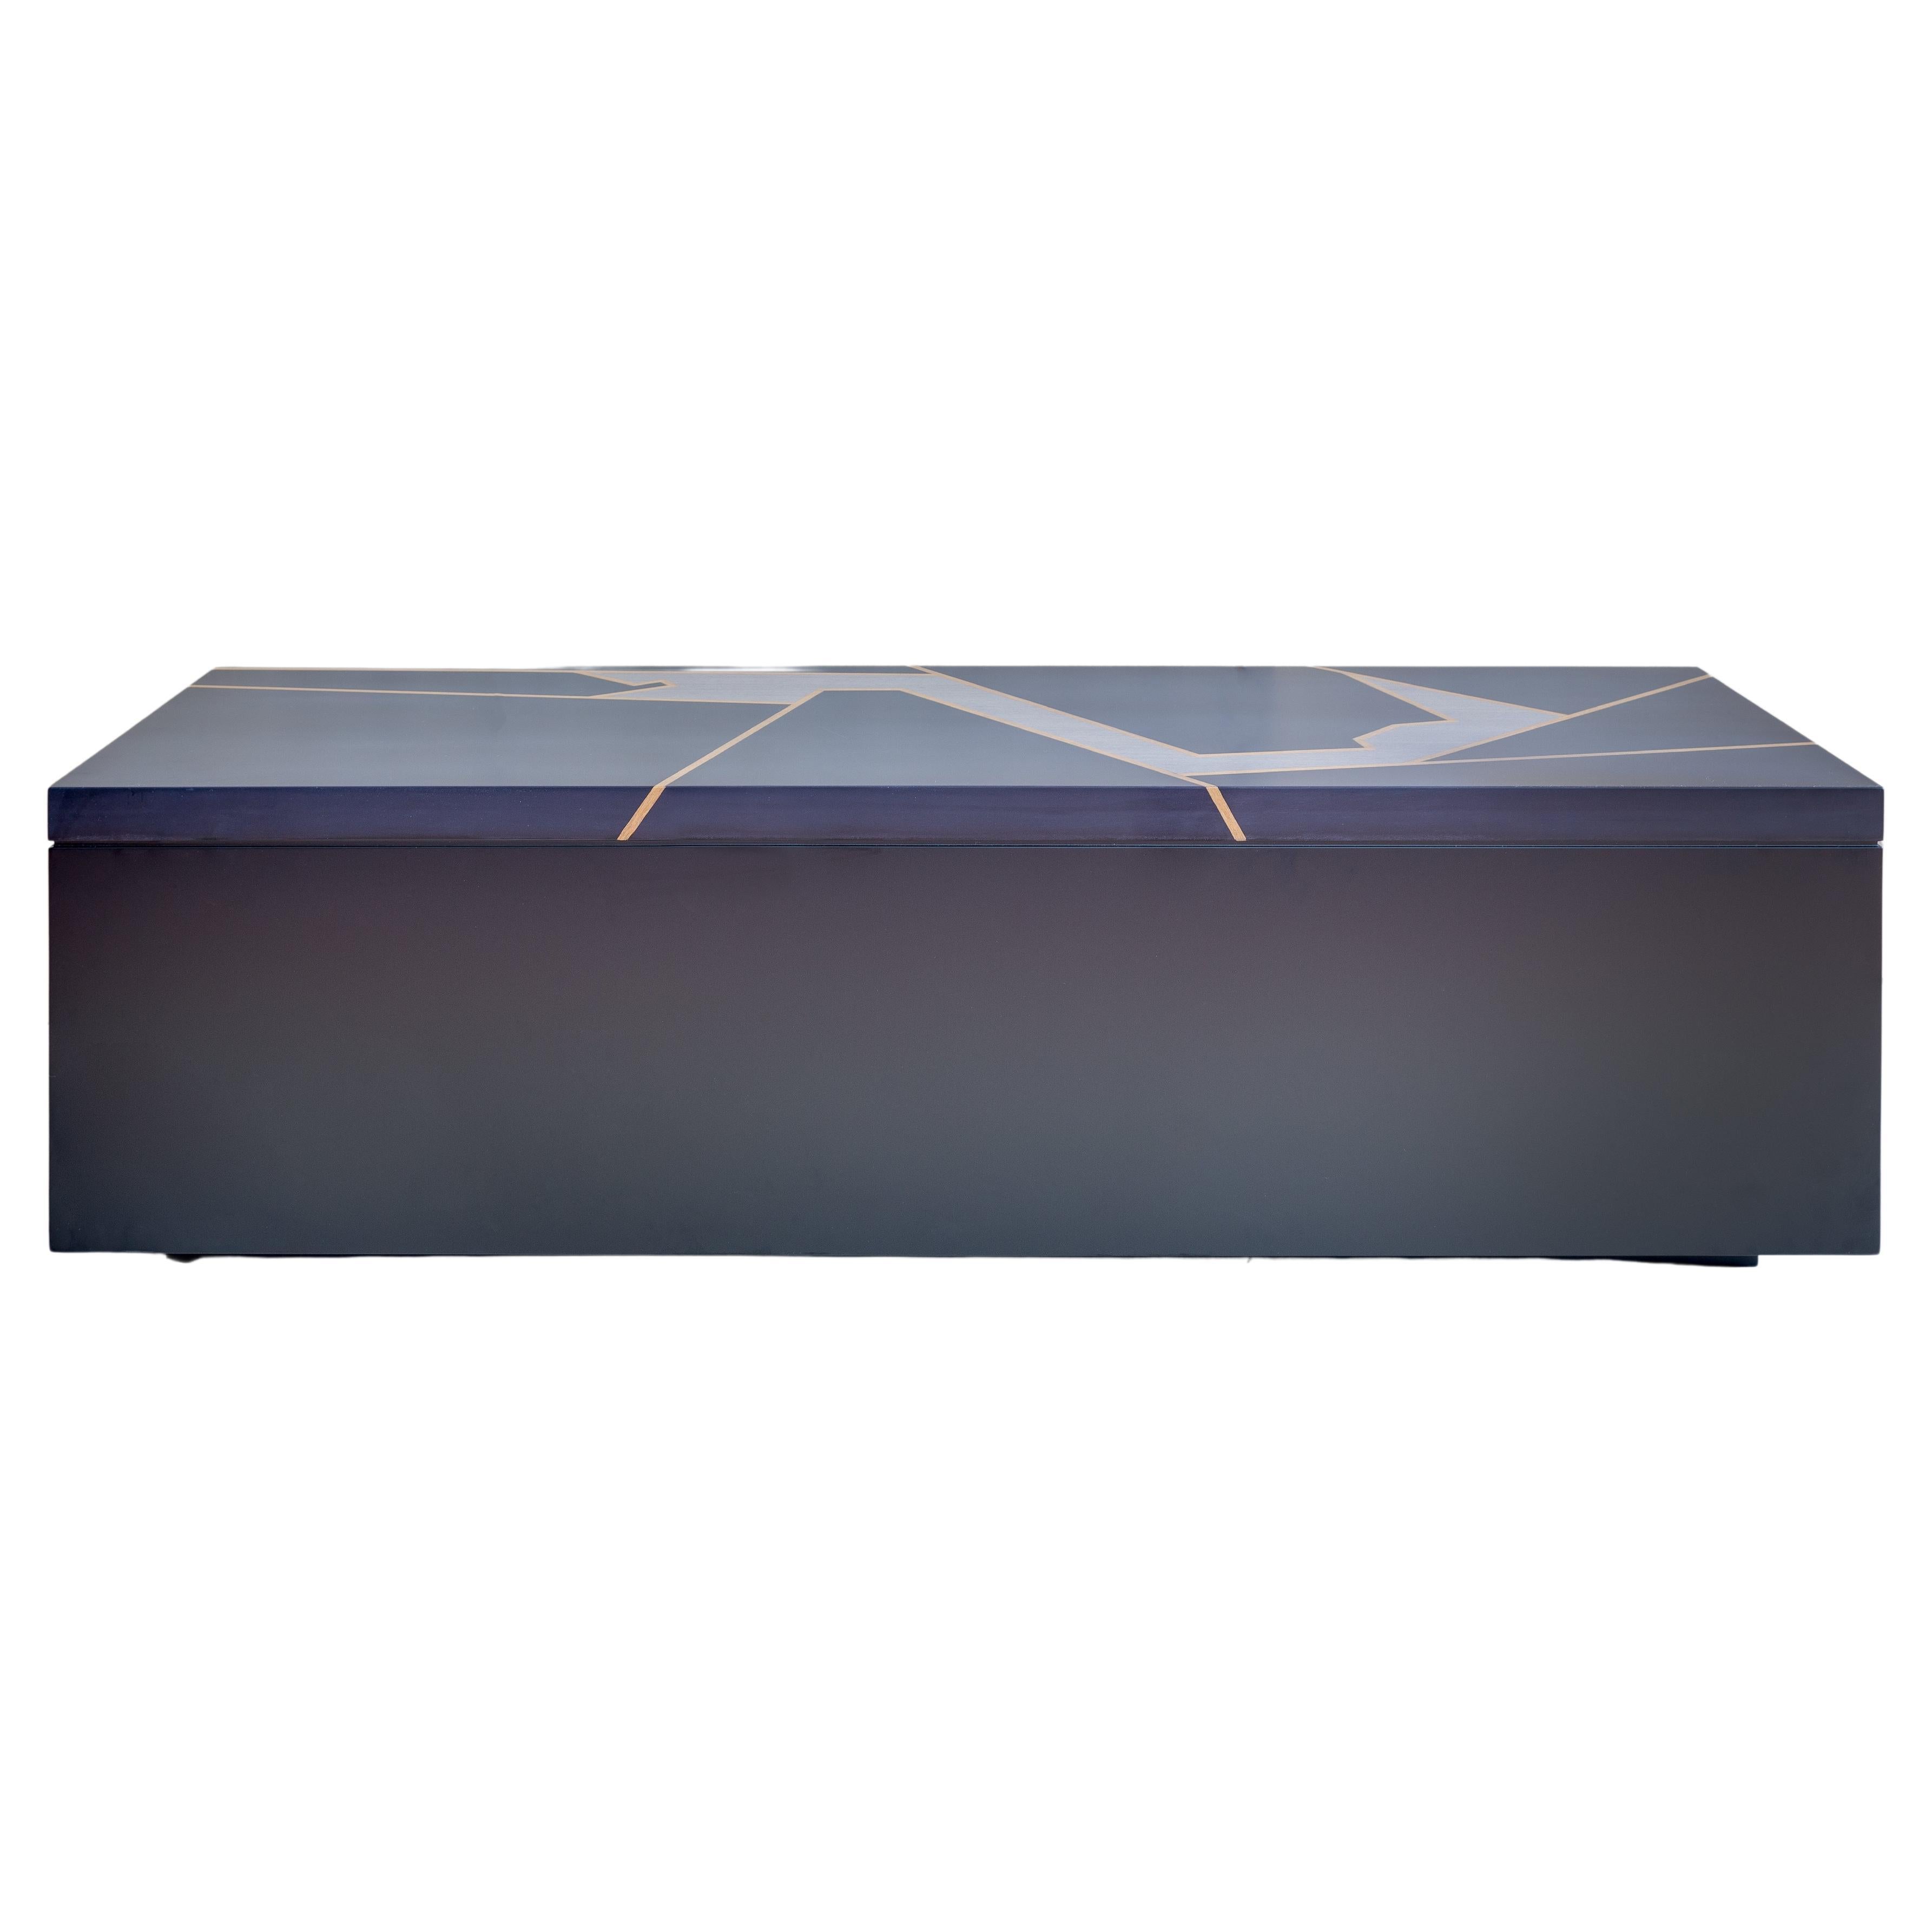 Rectangular Coffee Table Design Inspired By Monaco Formula 1 Race Track For Sale